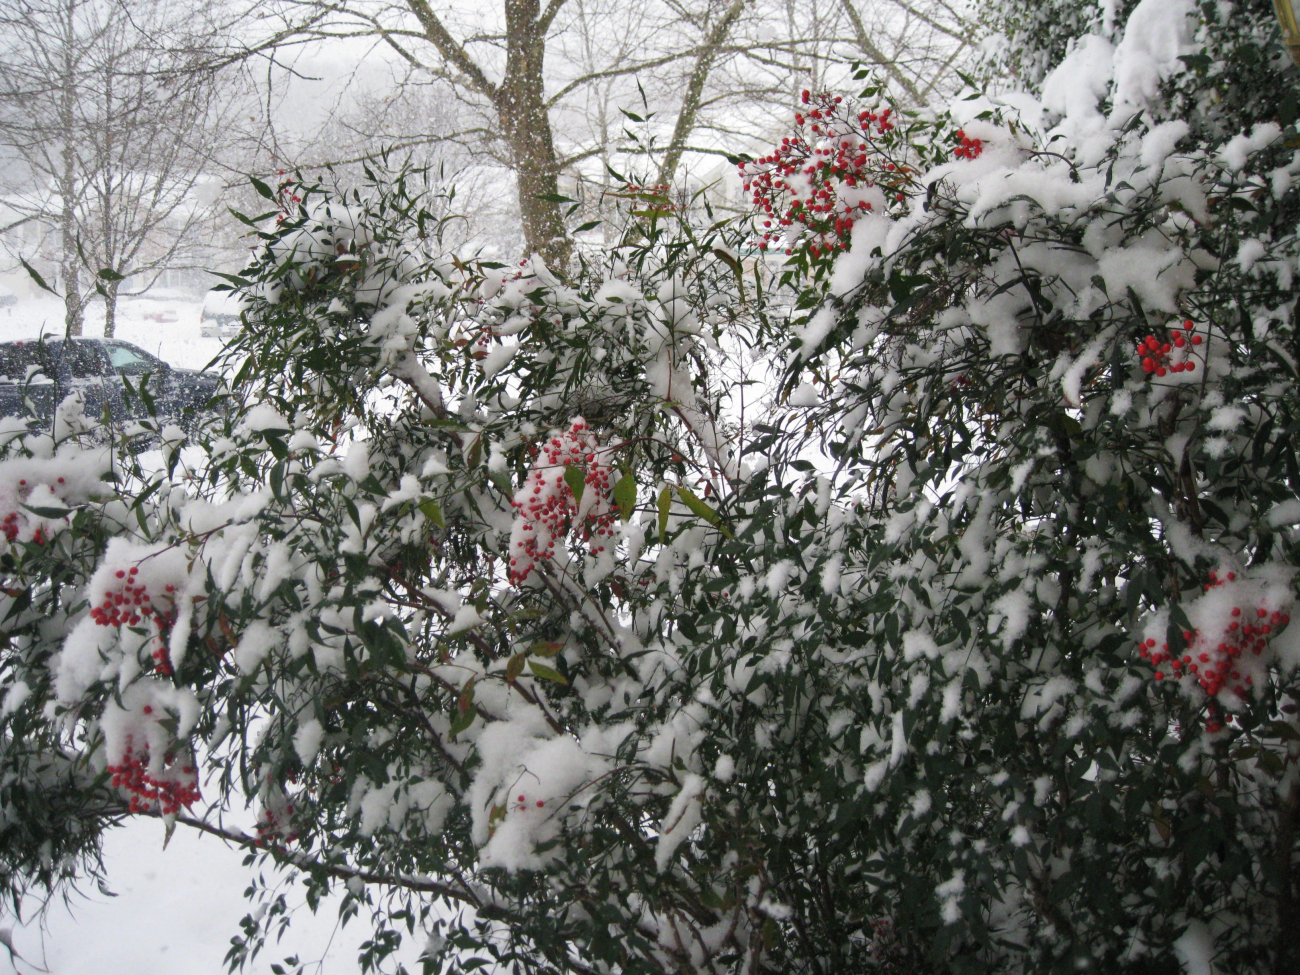 Red buries and snow during the first great storm of the 2009/2010 winter seasonin the Mid-Atlantic area